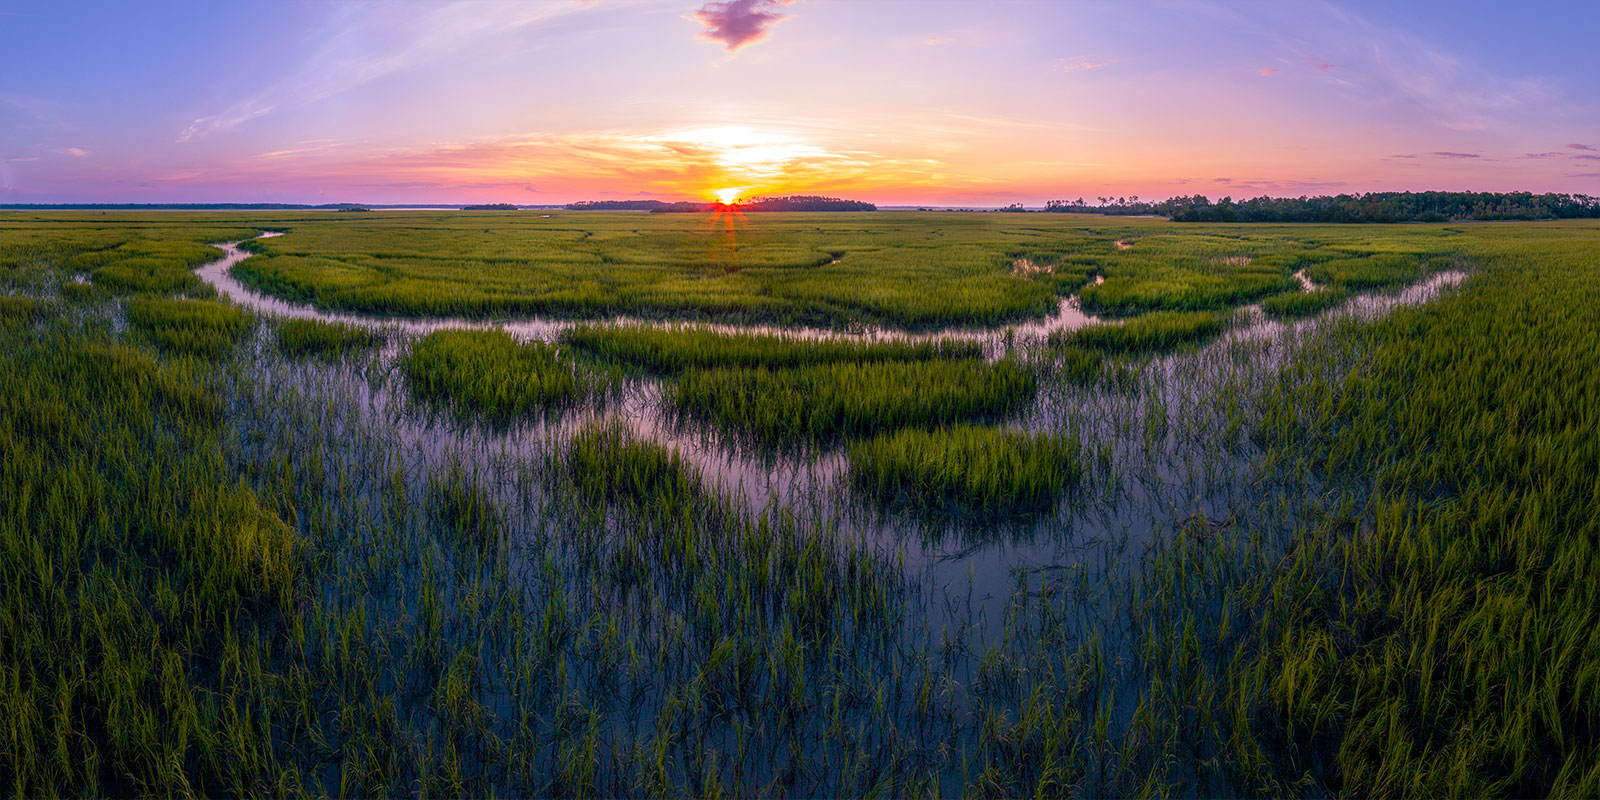 The sun sets over the salt marsh near the Broad River in Beaufort County, SC.